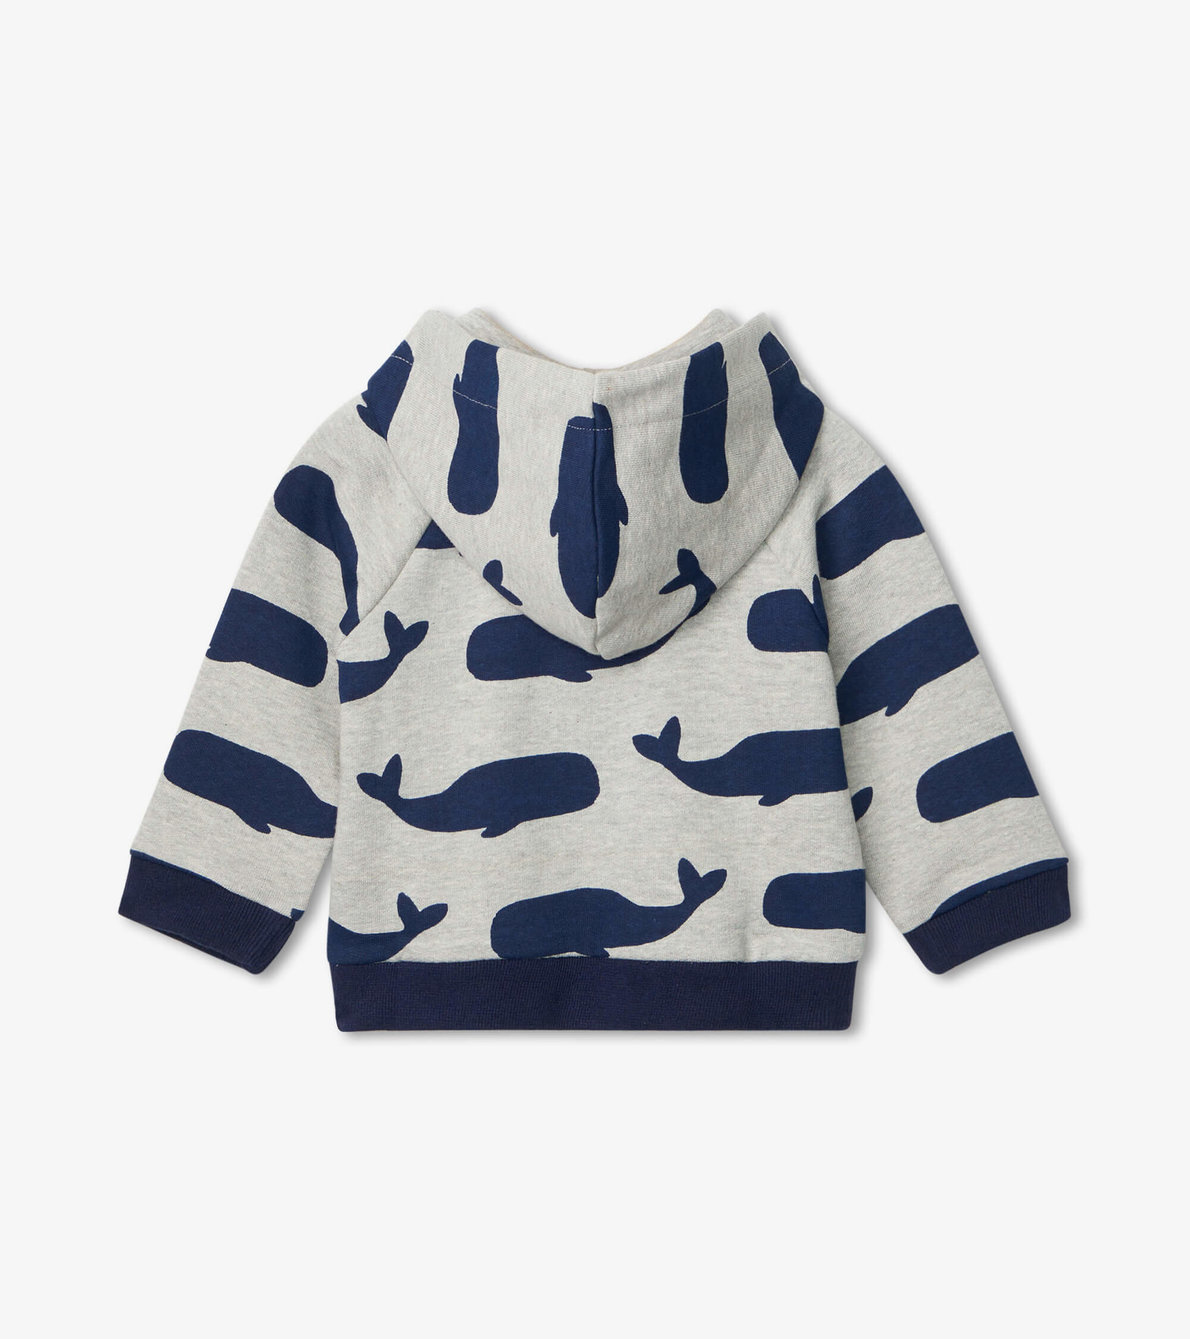 View larger image of Nautical Whales Baby Zip Up Hoodie